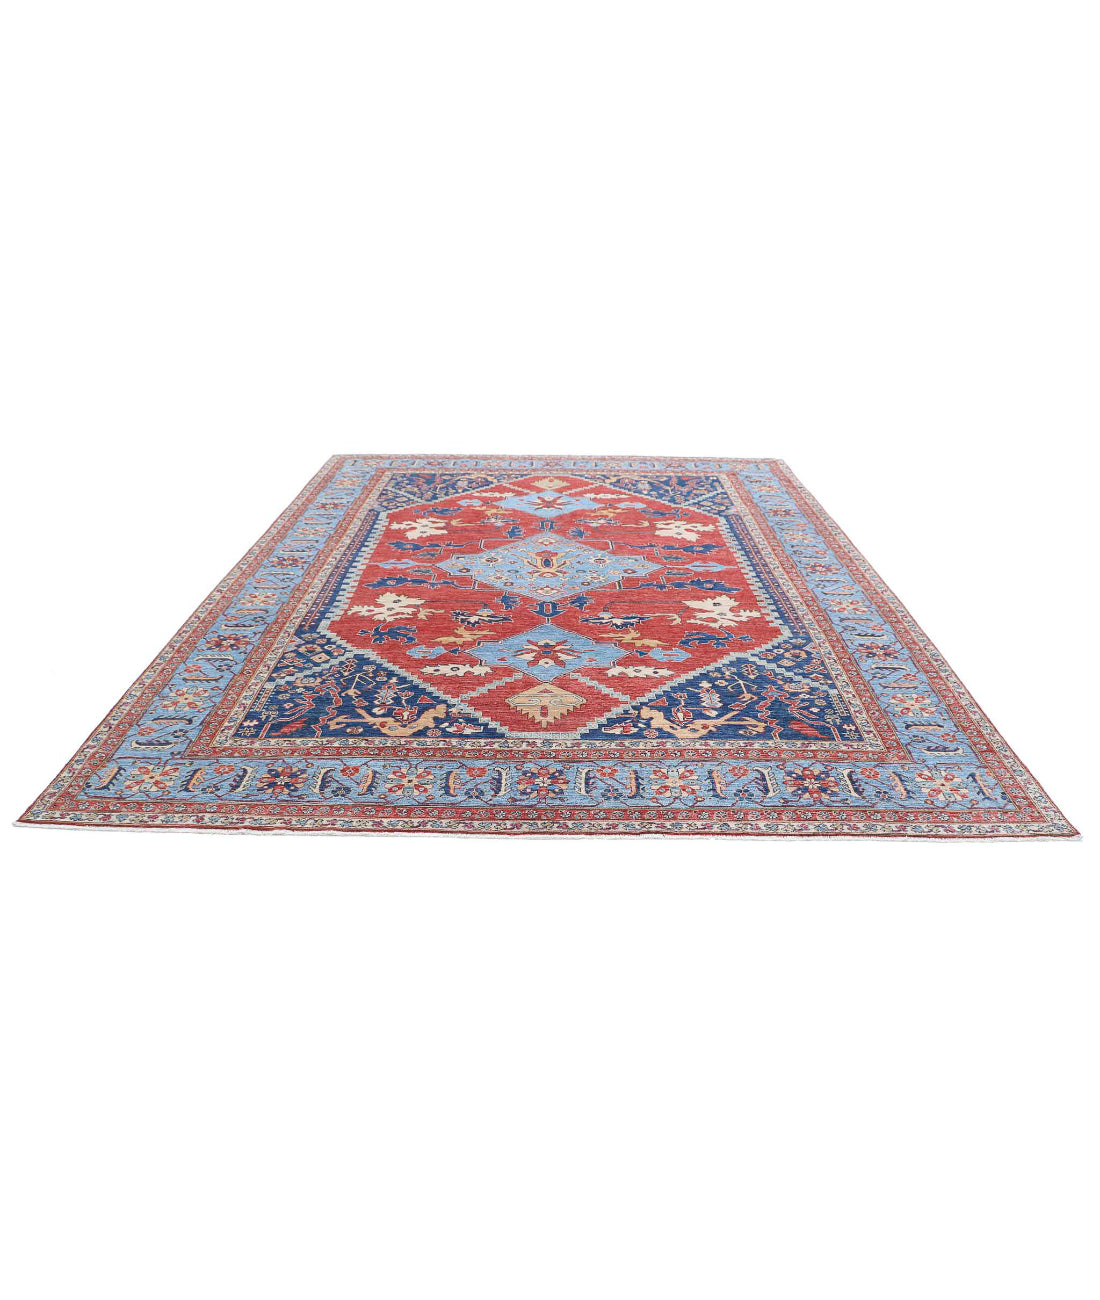 Heriz 9'5'' X 11'10'' Hand-Knotted Wool Rug 9'5'' x 11'10'' (283 X 355) / Red / Blue